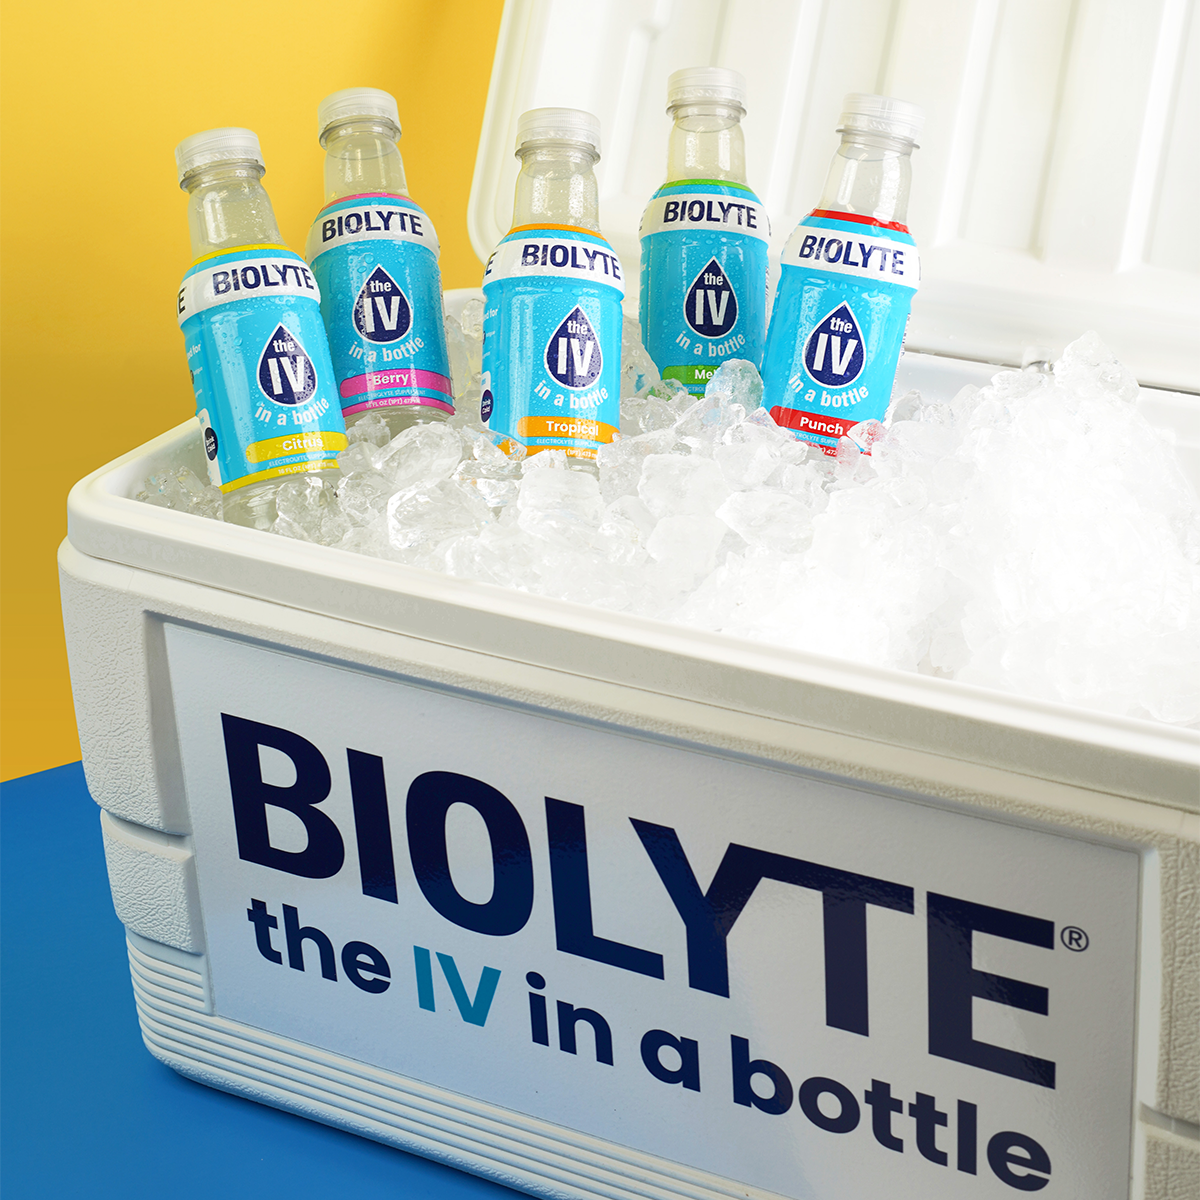 Don't forget, BIOLYTE is best if you drink cold!